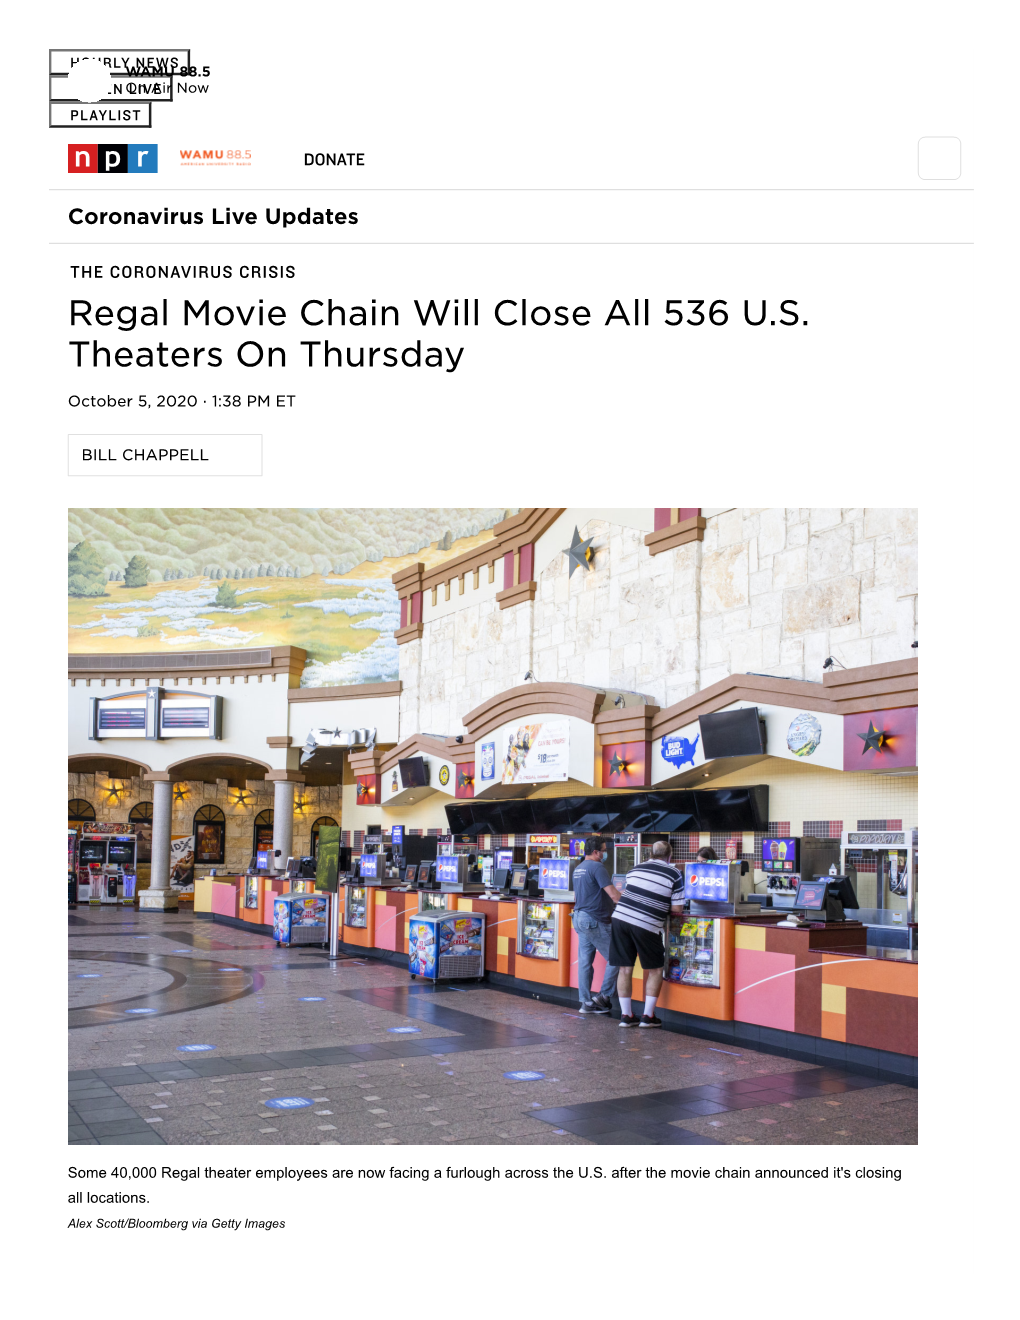 Regal Movie Chain Will Close All 536 U.S. Theaters on Thursday